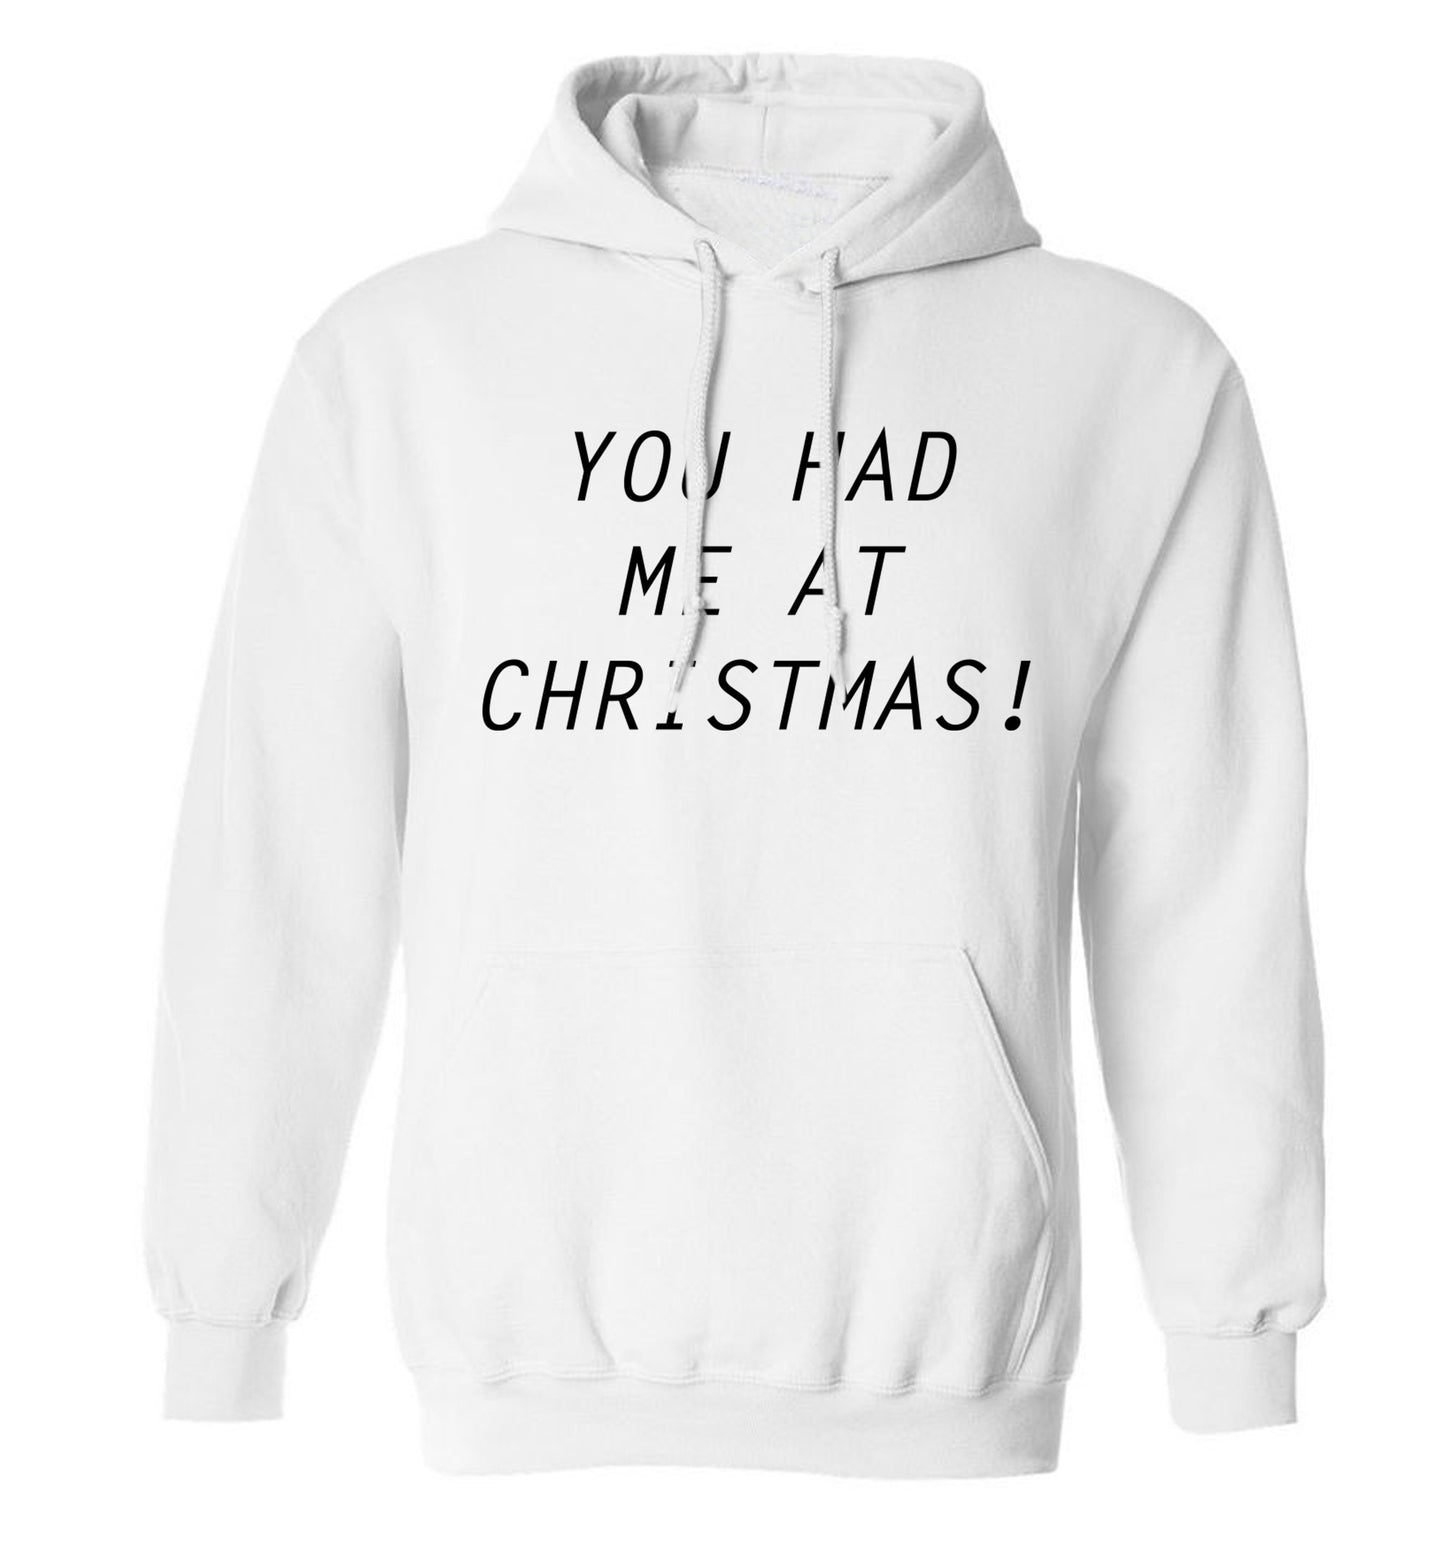 You had me at Christmas adults unisex white hoodie 2XL